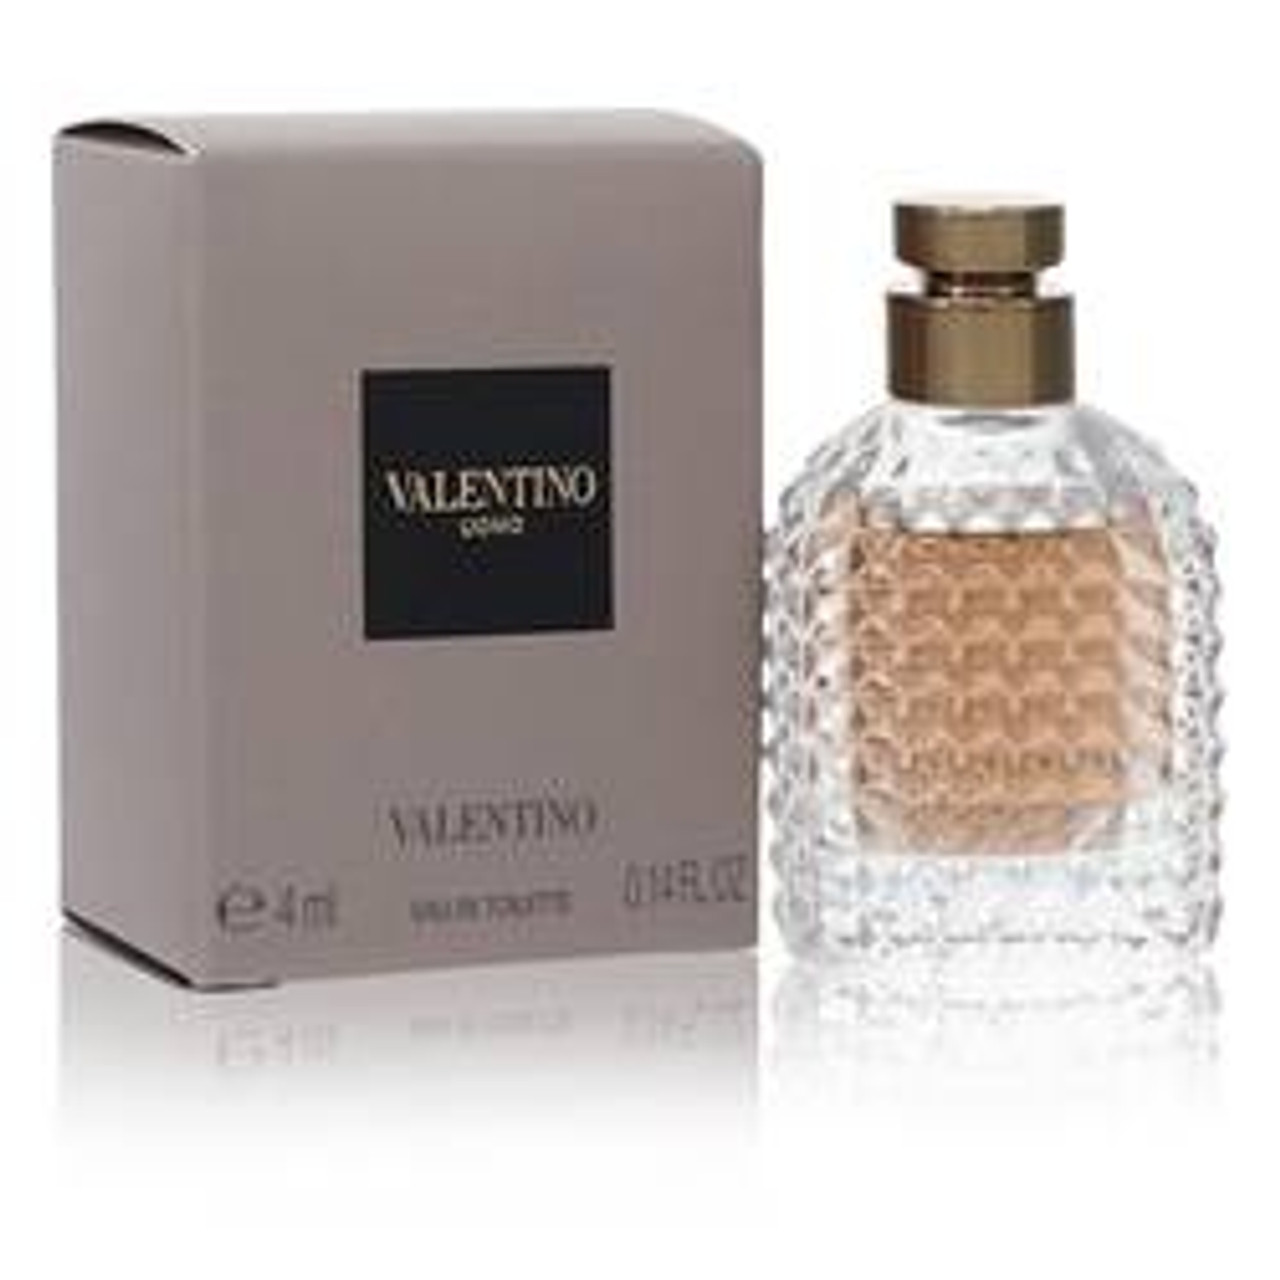 Valentino Uomo Cologne By Valentino Mini EDT 0.14 oz for Men - [From 75.00 - Choose pk Qty ] - *Ships from Miami